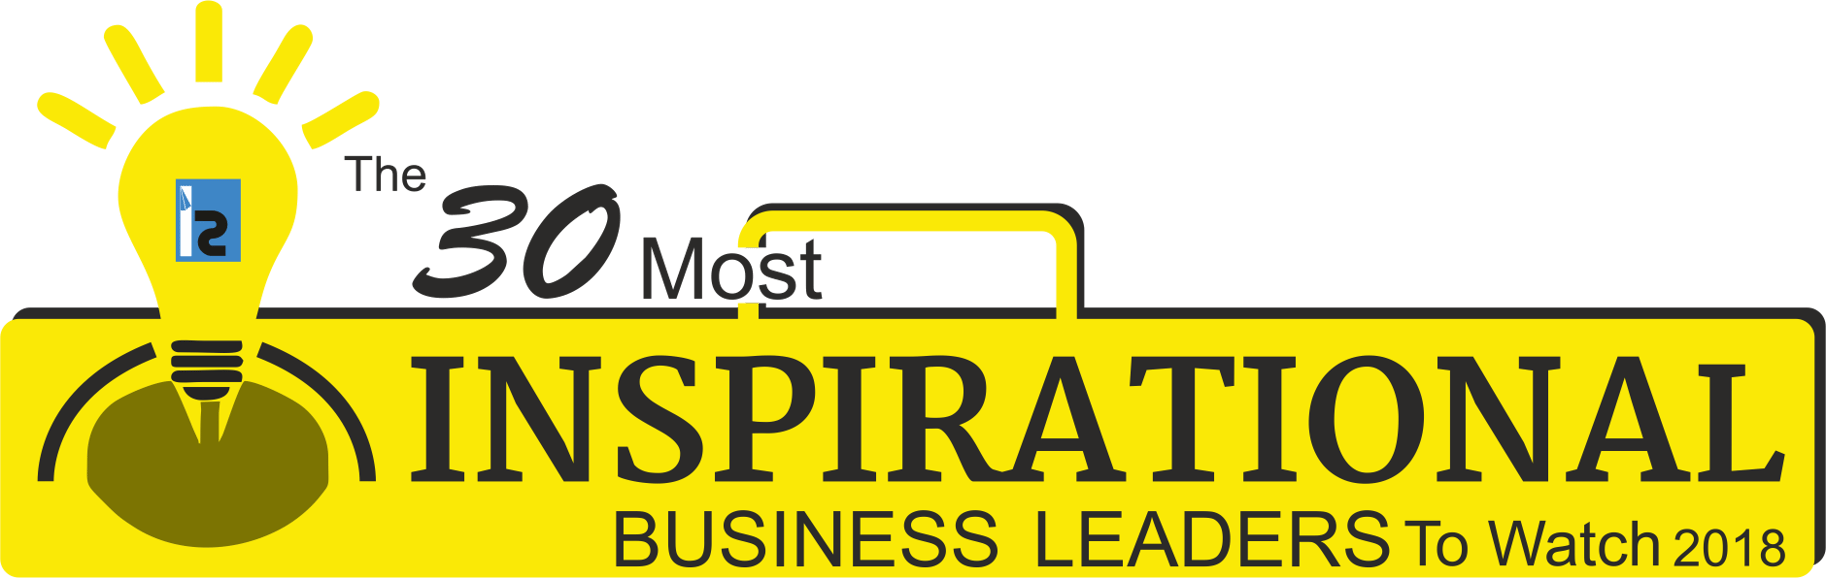 Insights Success - The 30 Most Inspirational Business Leader to Watch 2018